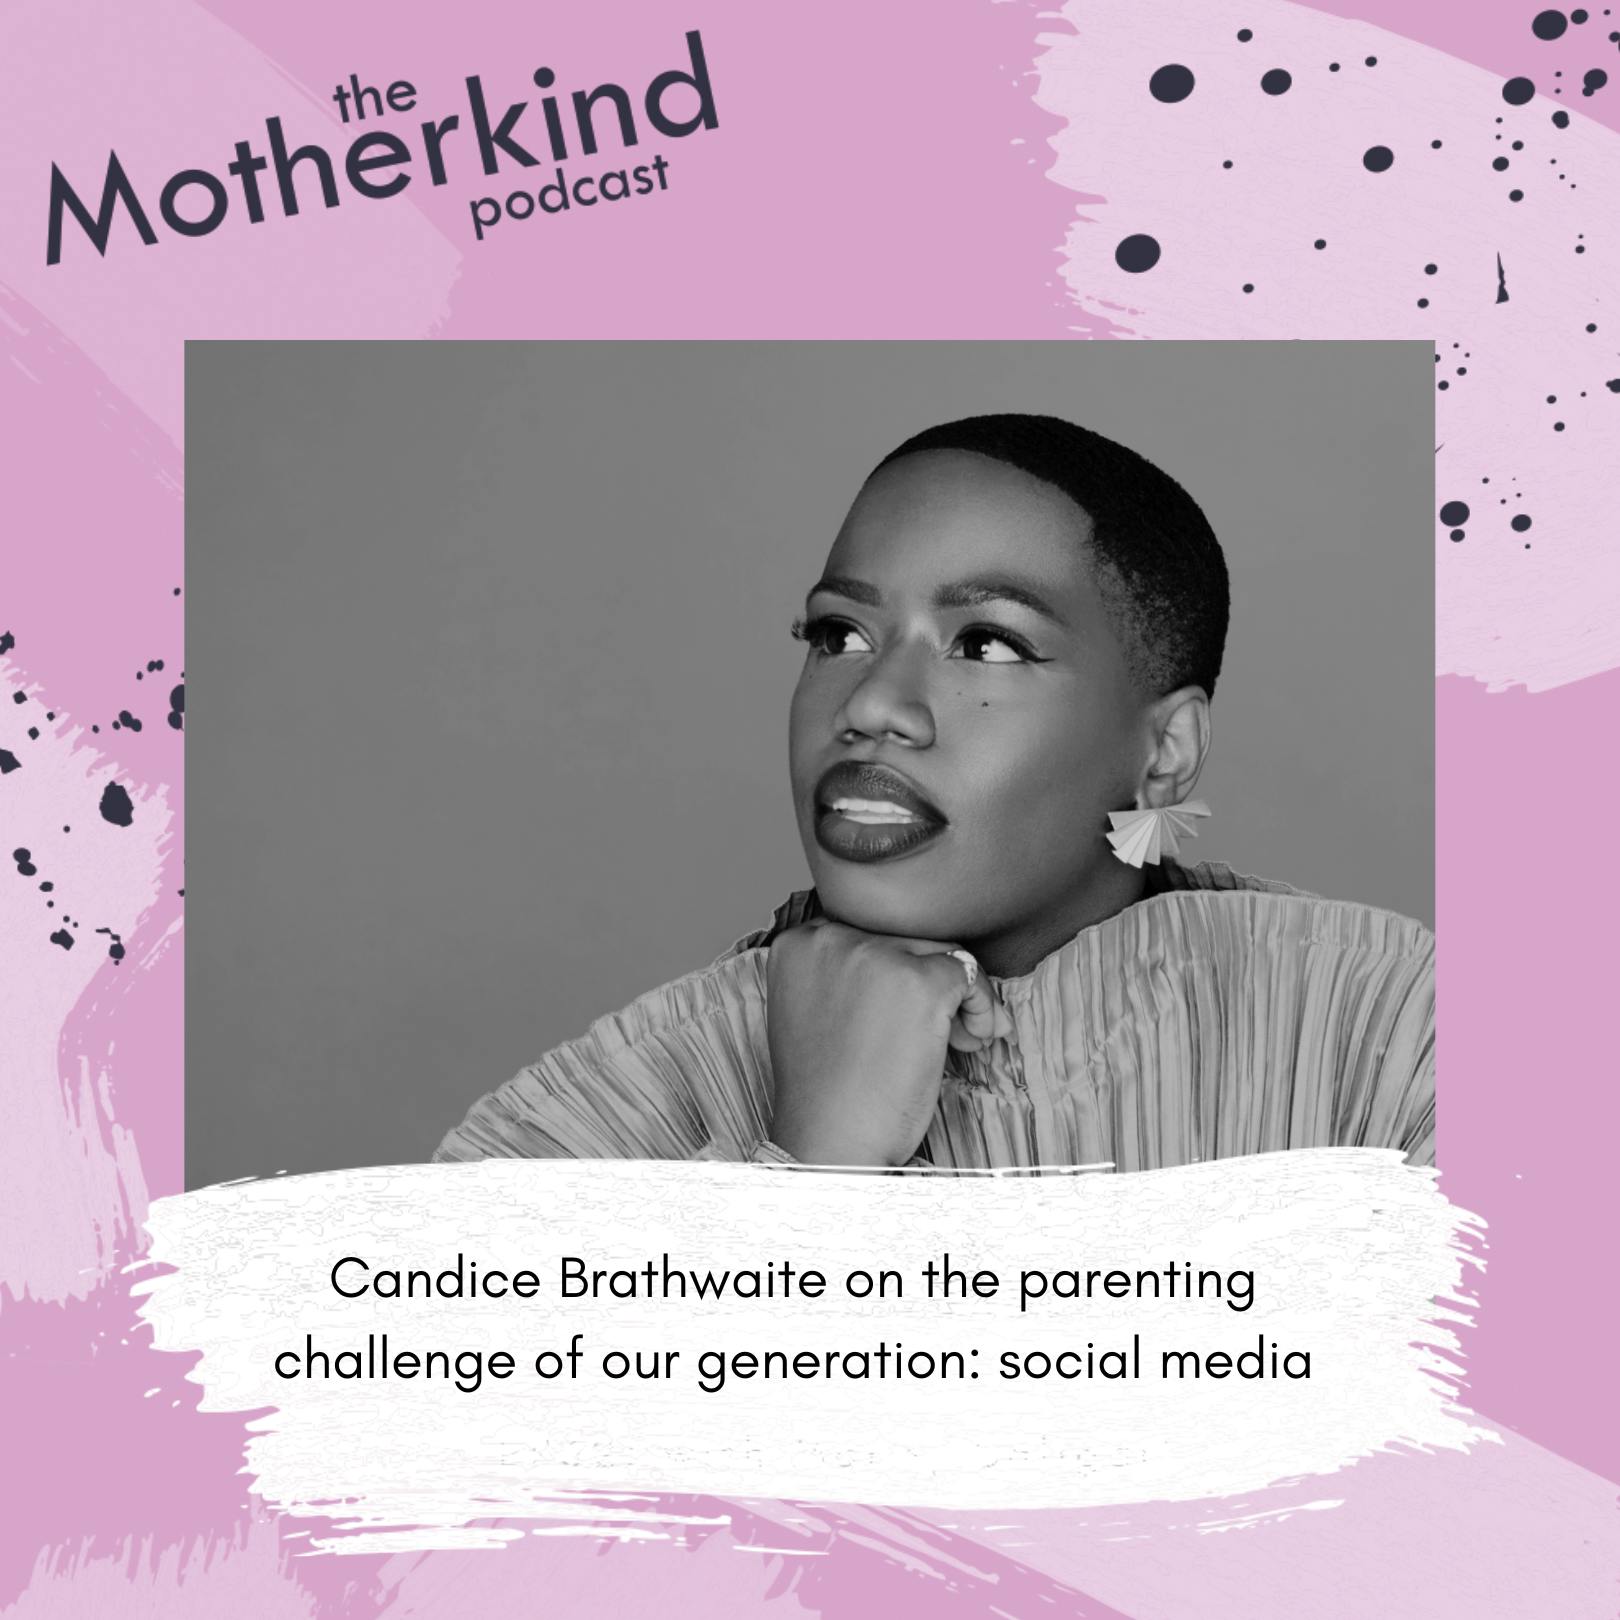 Candice Brathwaite on the parenting challenge of our generation: social media